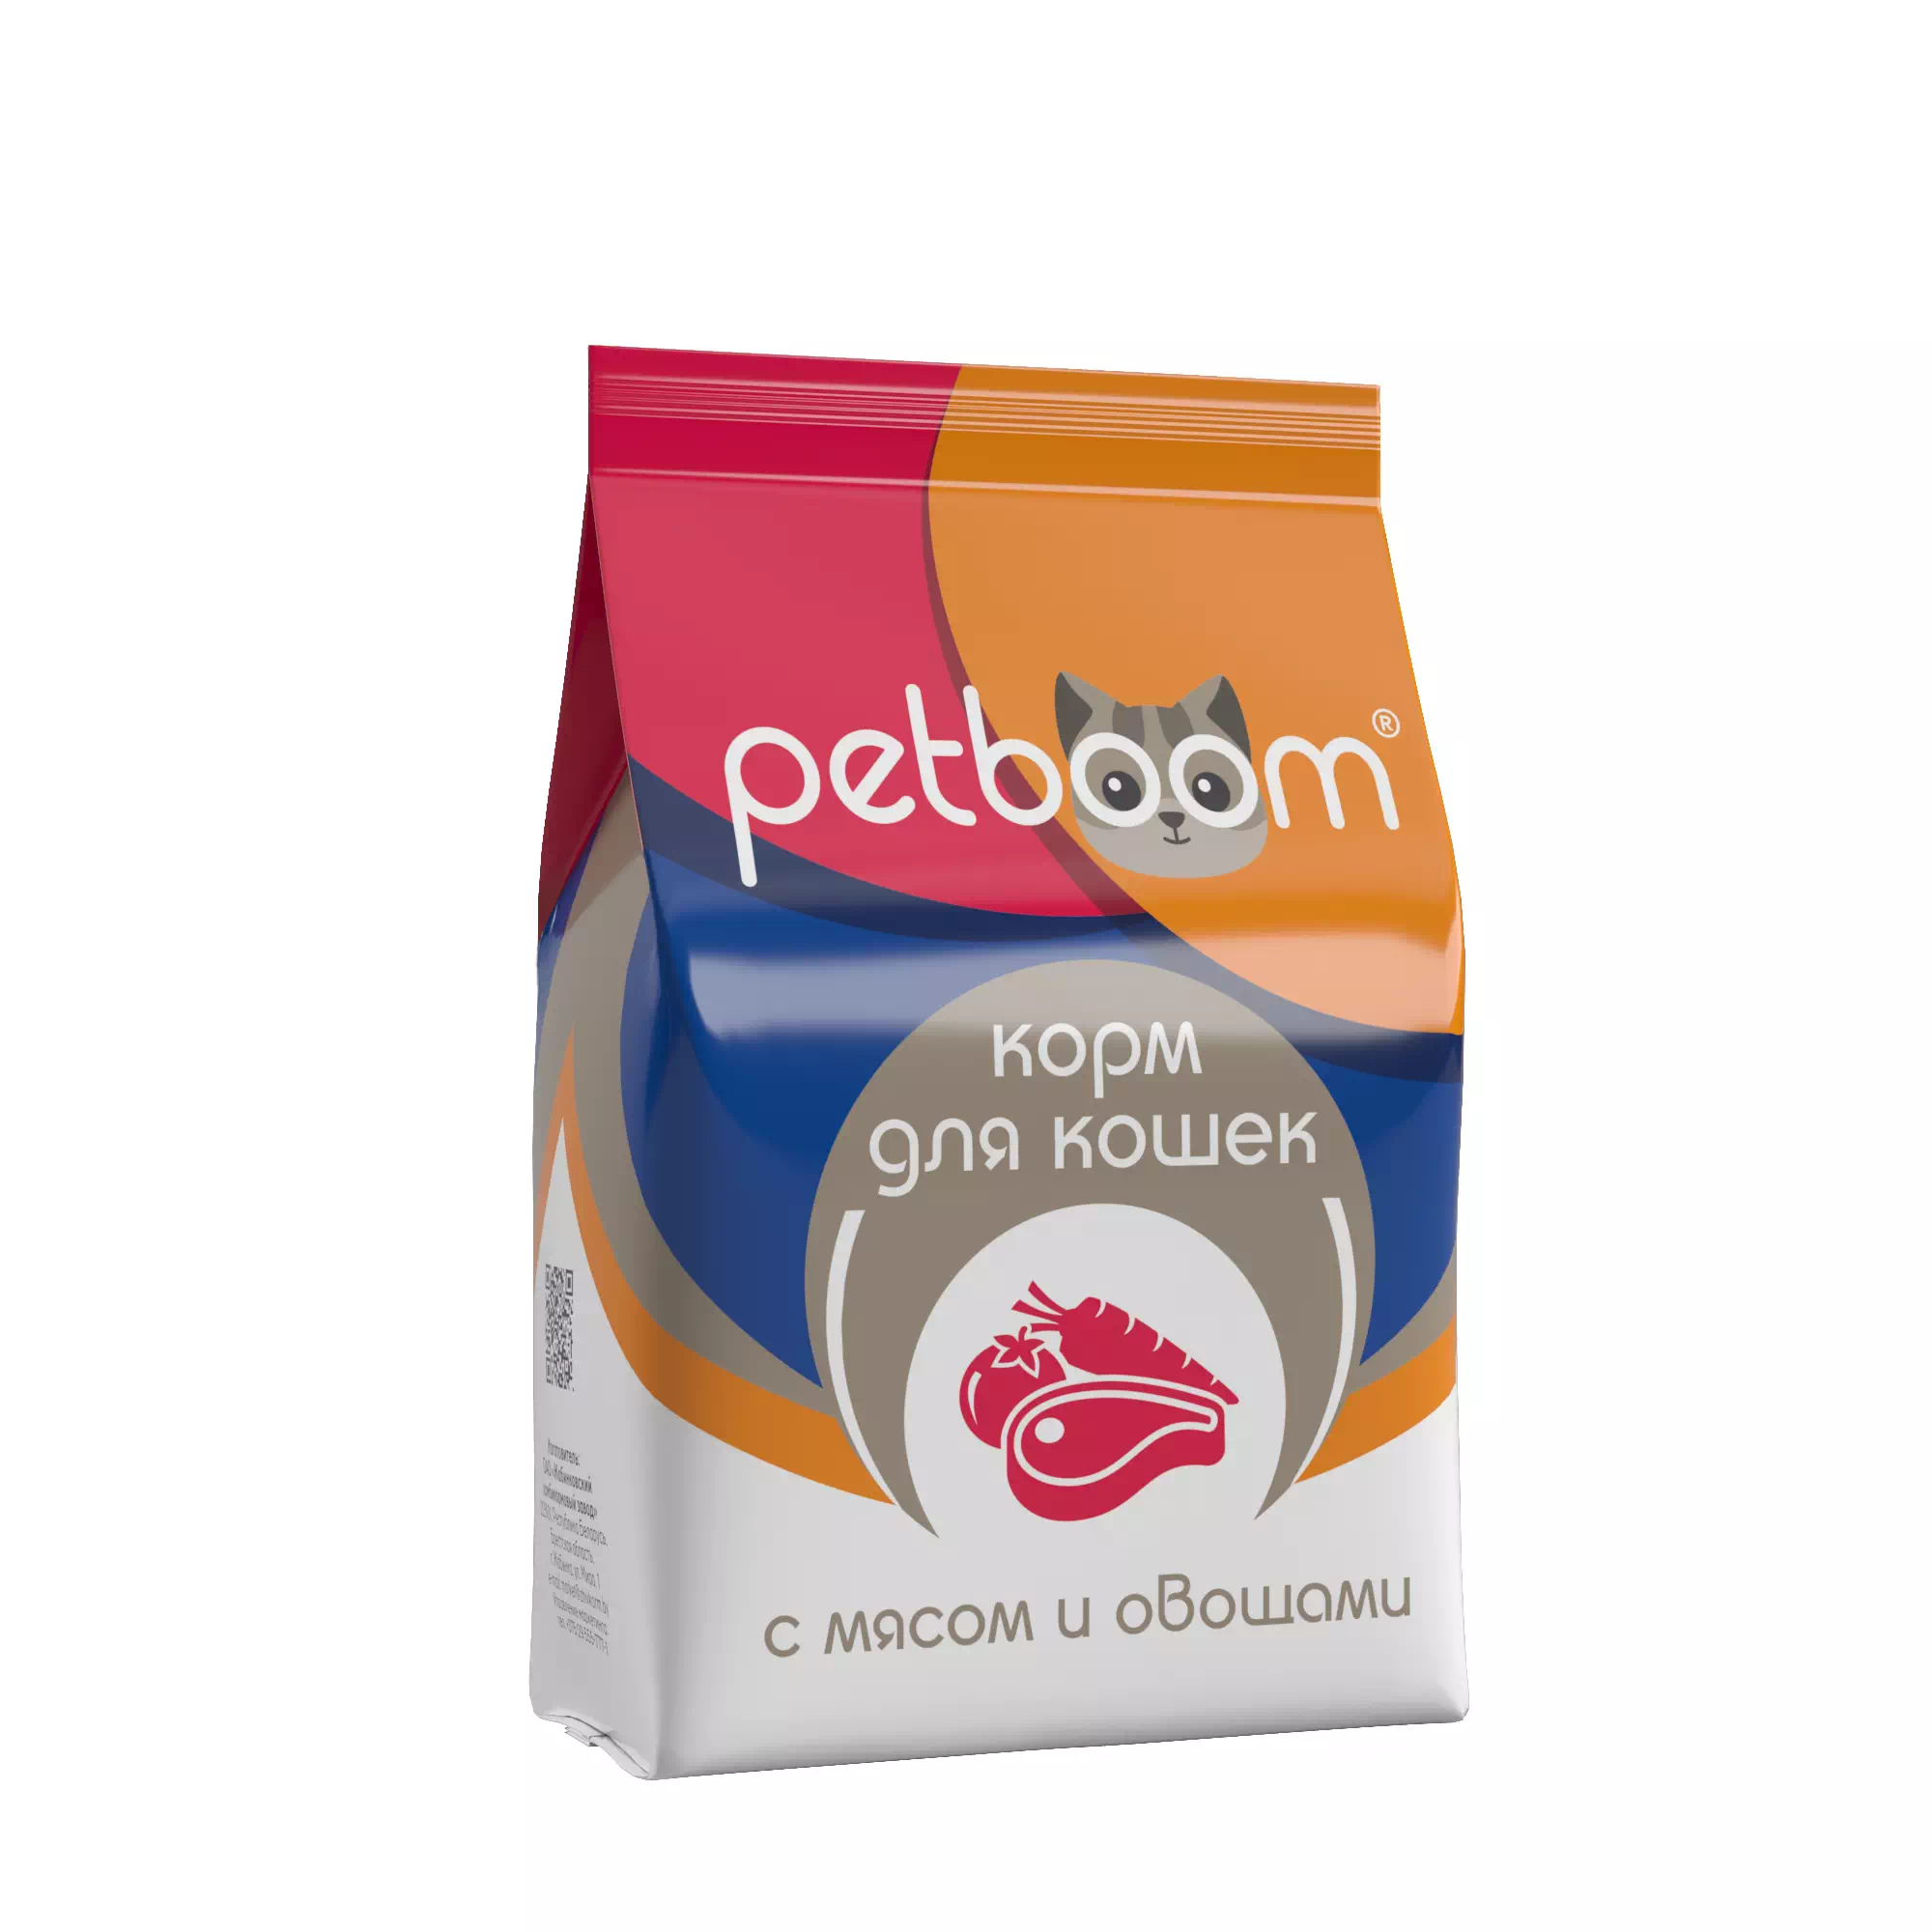 "Petboom" dry food for adult cats with meat and vegetables